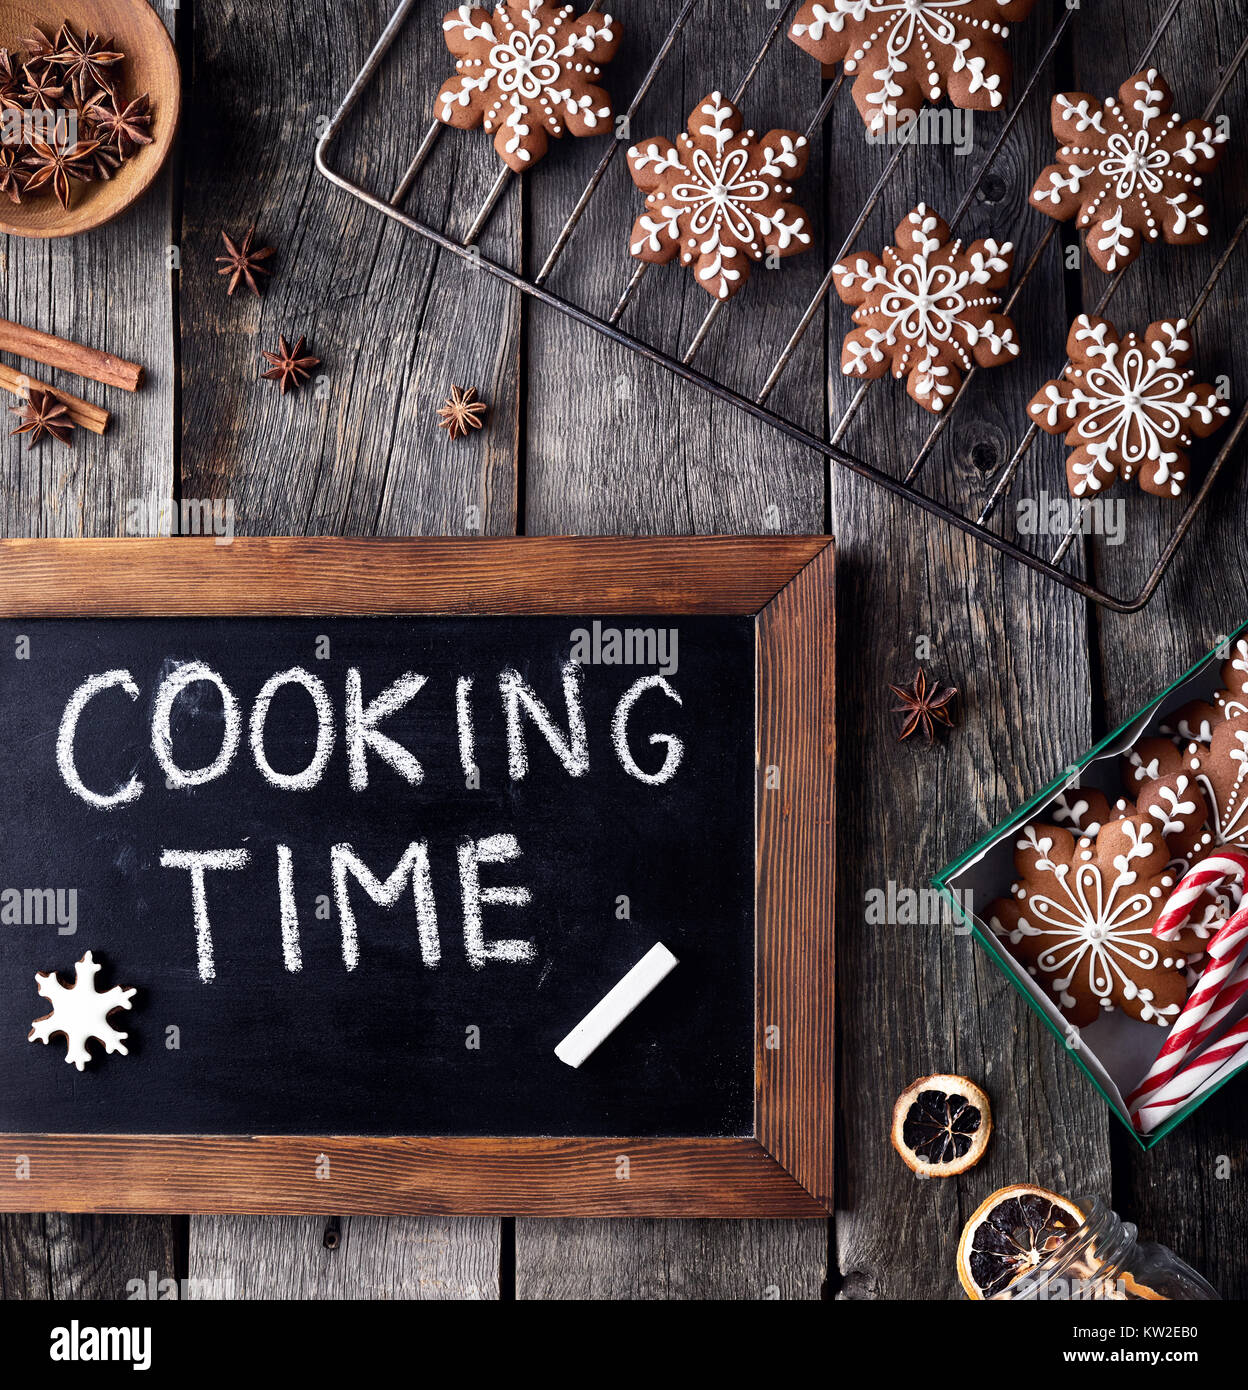 Cooking time for Christmas gingerbread stars on rustic wooden background Stock Photo